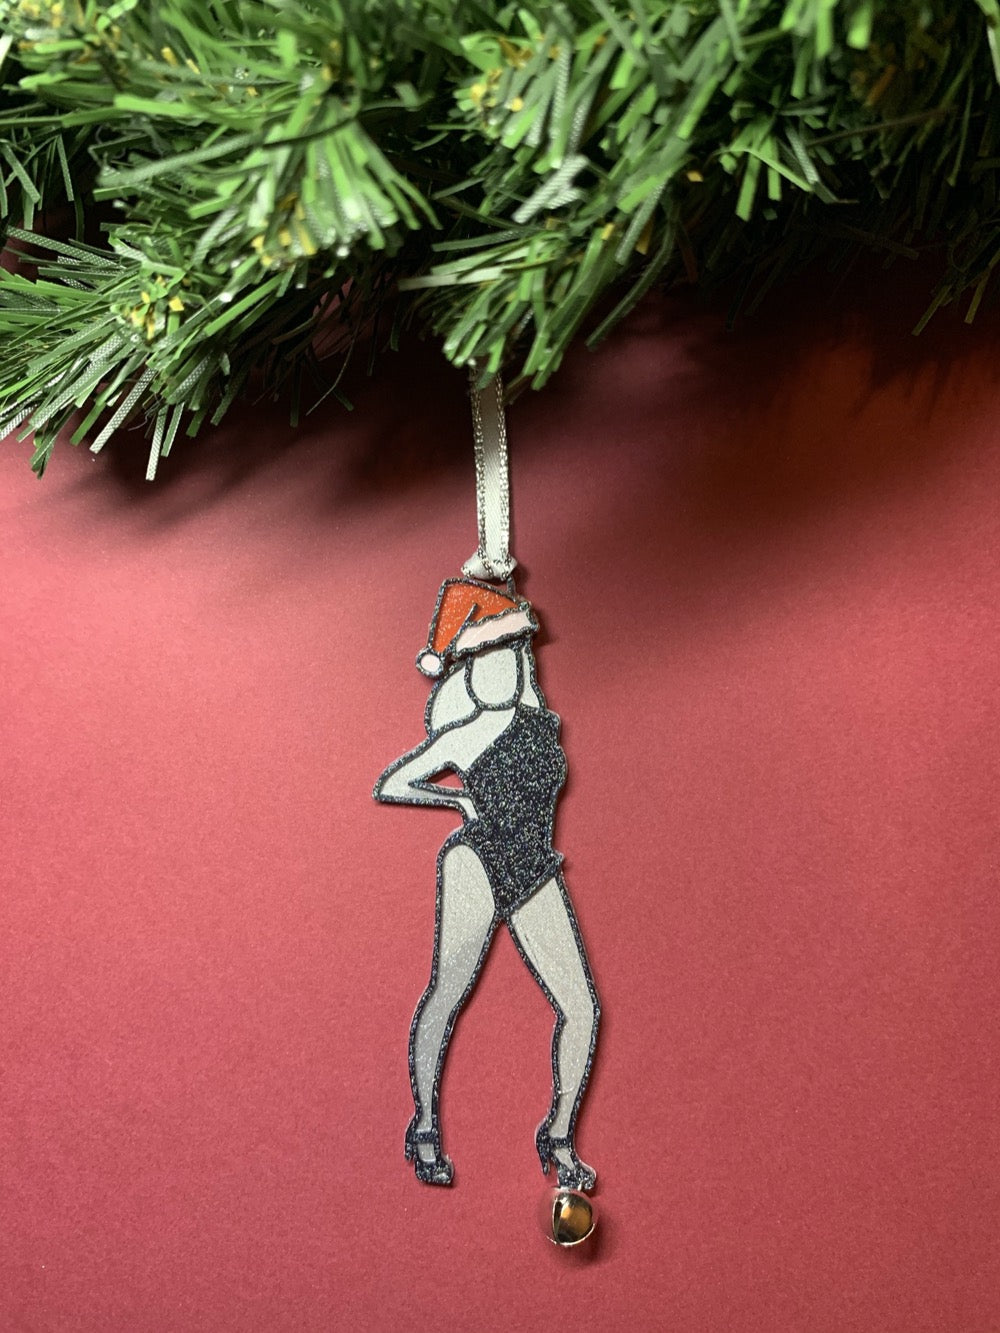 Hanging from a holiday wreath is a ornament that looks like Beyonce from her Single Ladies video: She is posing with her hand on her hip and one leg jutting out to the side. She is wearing a red and white santa hat and a black lone shoulder leotard. She is wearing black strappy heels and a small jingle bell hangs from one of her feet. The entire ornament is covered in a shimmery glitter that will catch all the lights of your holiday celebration. 